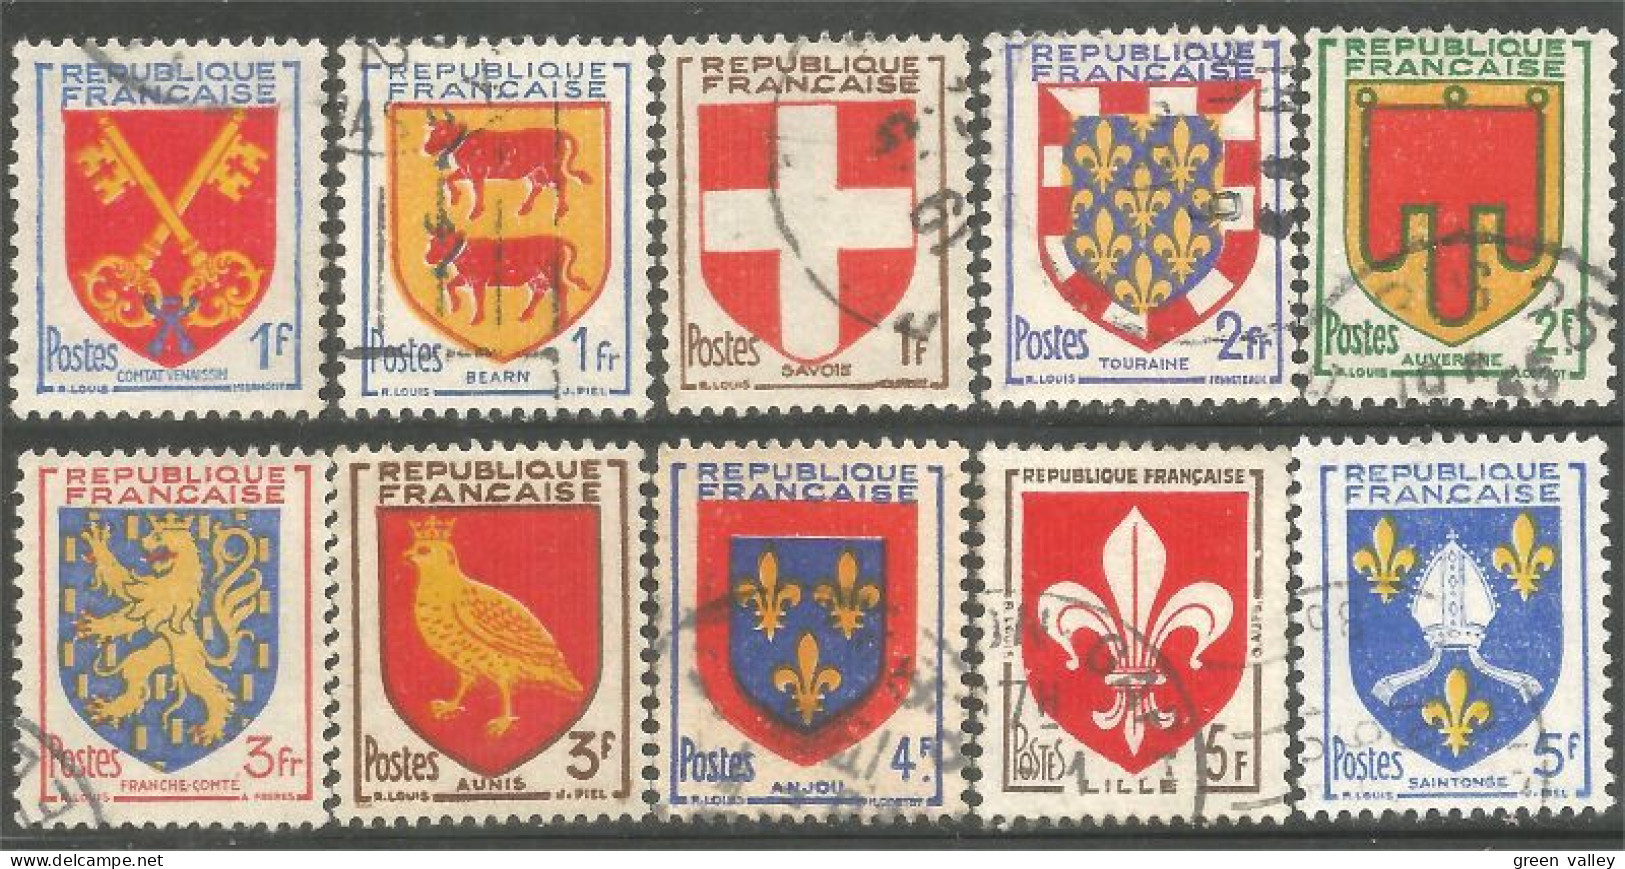 329 France 10 Timbres Différents Blasons Armoiries Coat Of Arms TB Oblitérations Légères VF Light Cancels (559b) - Used Stamps